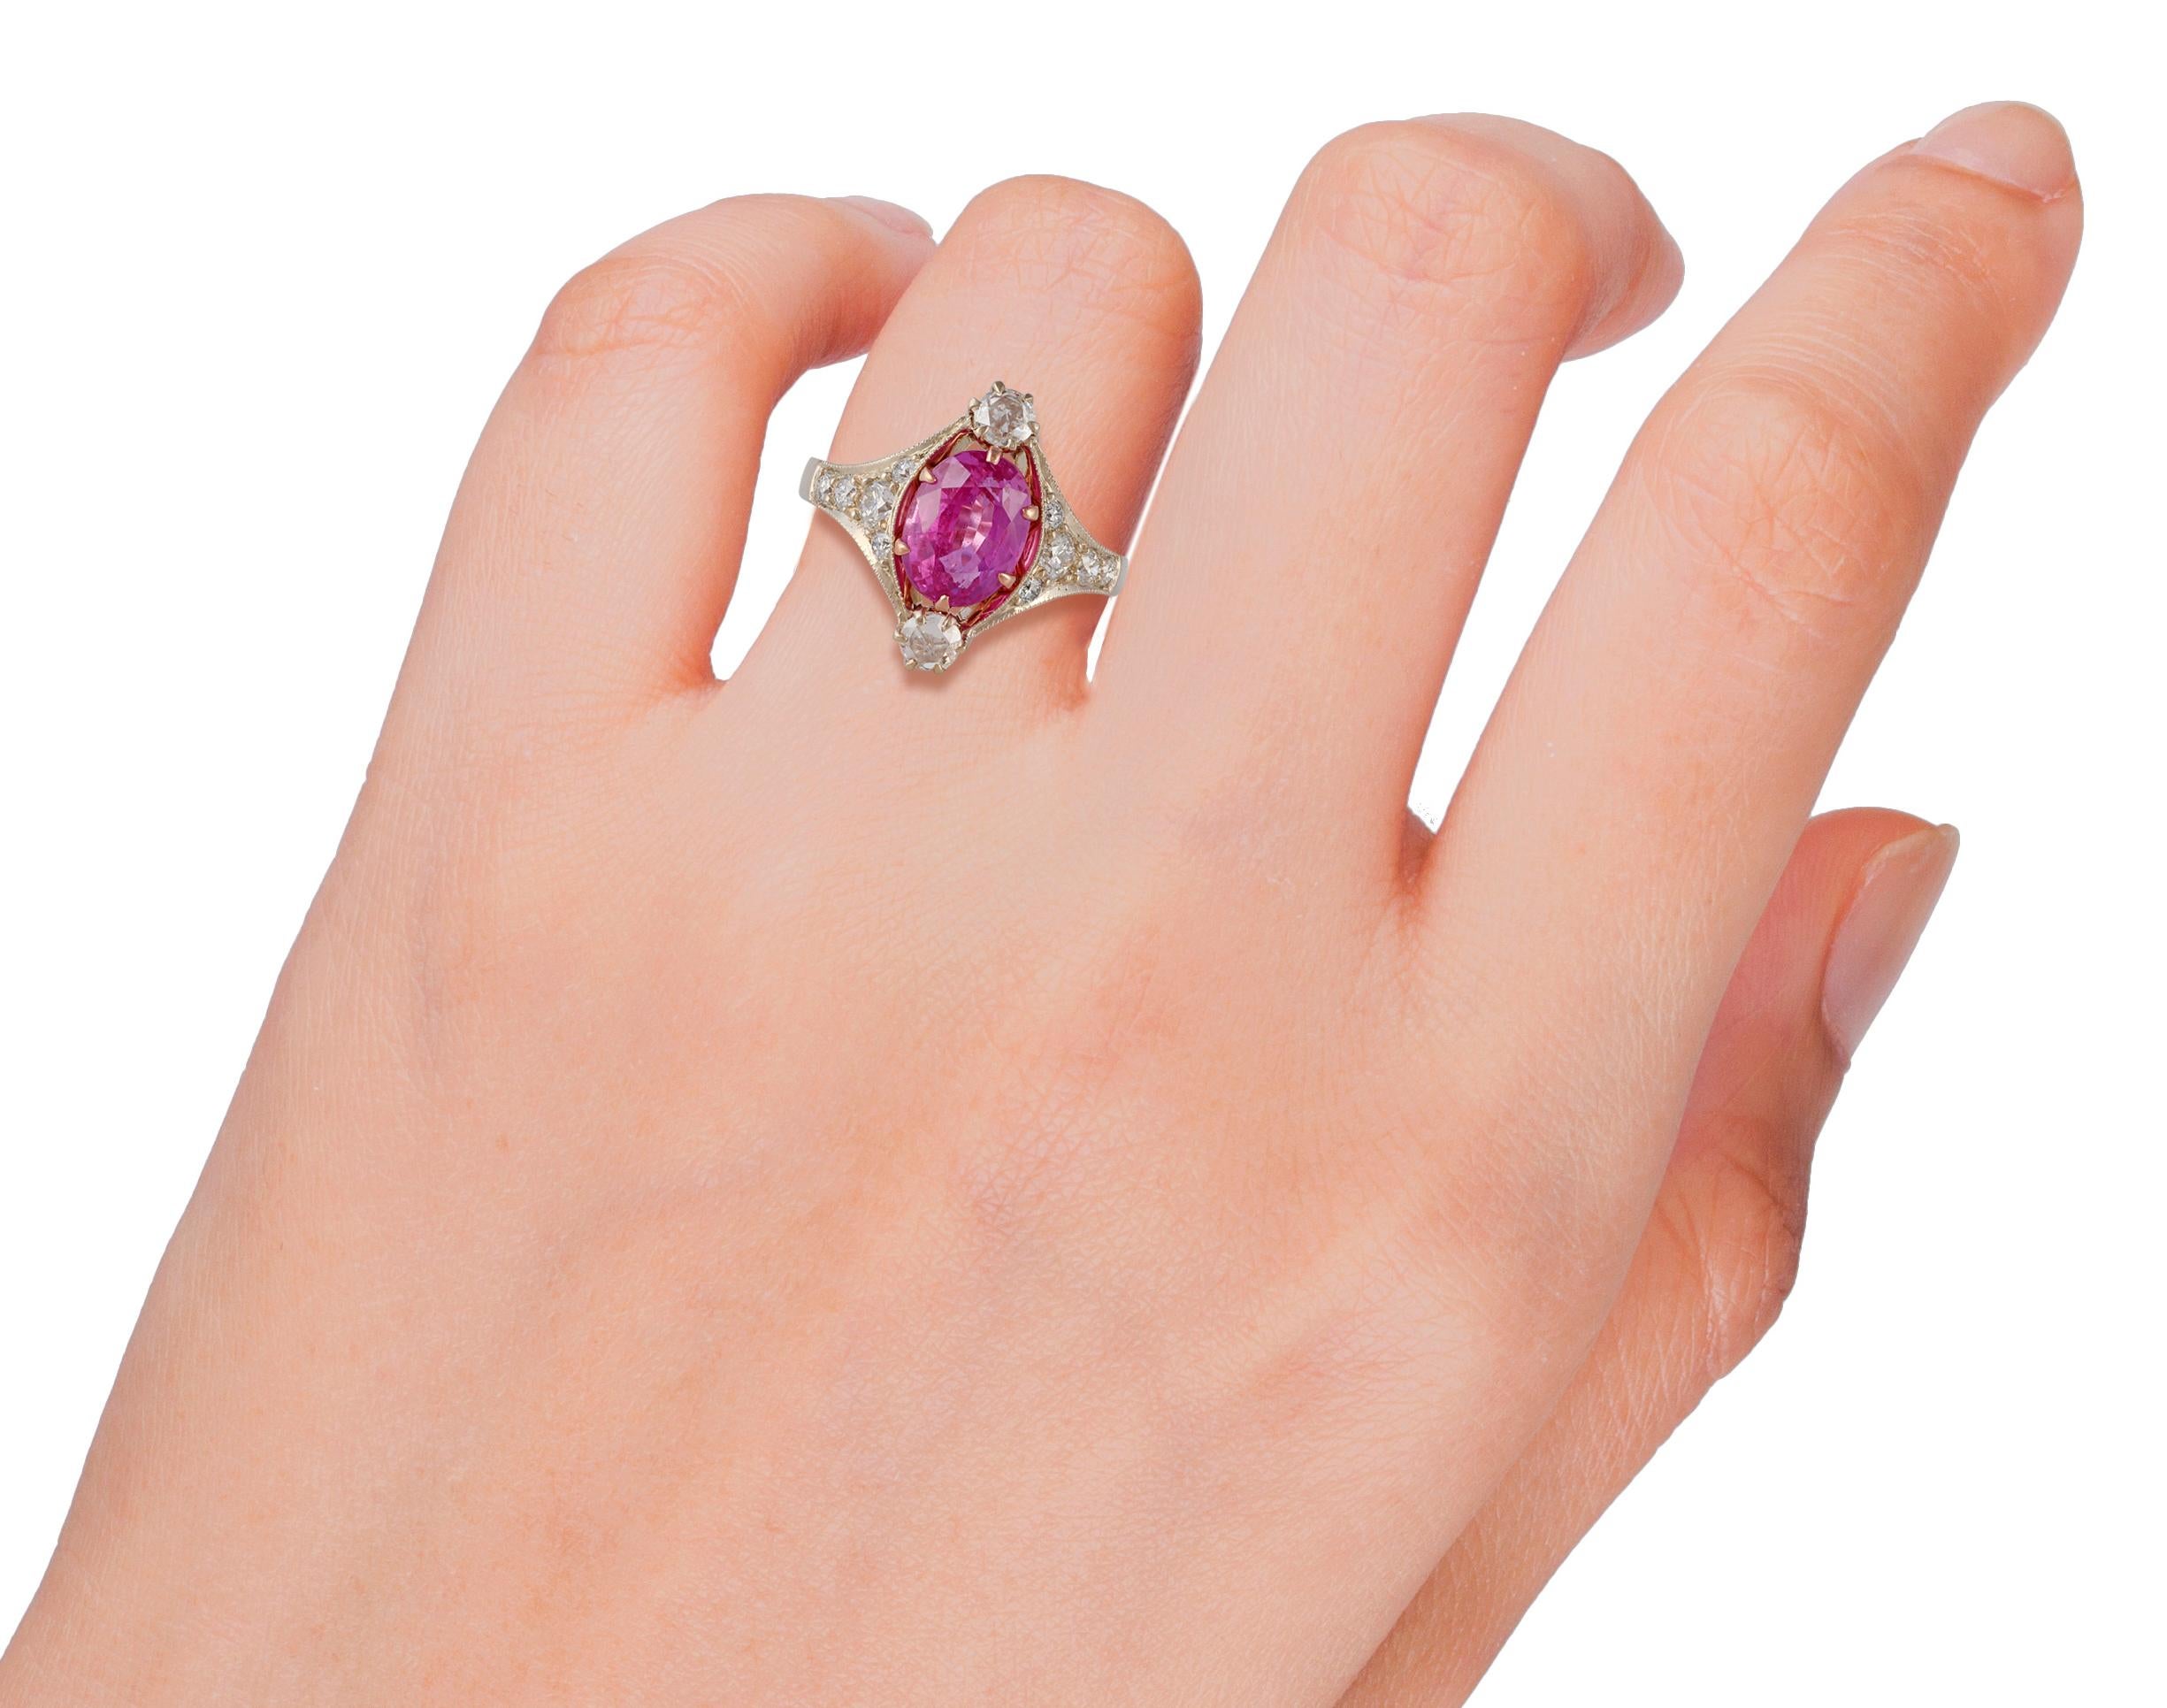 Oval Cut 2.74 Carat Pink Sapphire and Diamond Ring Studded in Matte White Gold For Sale